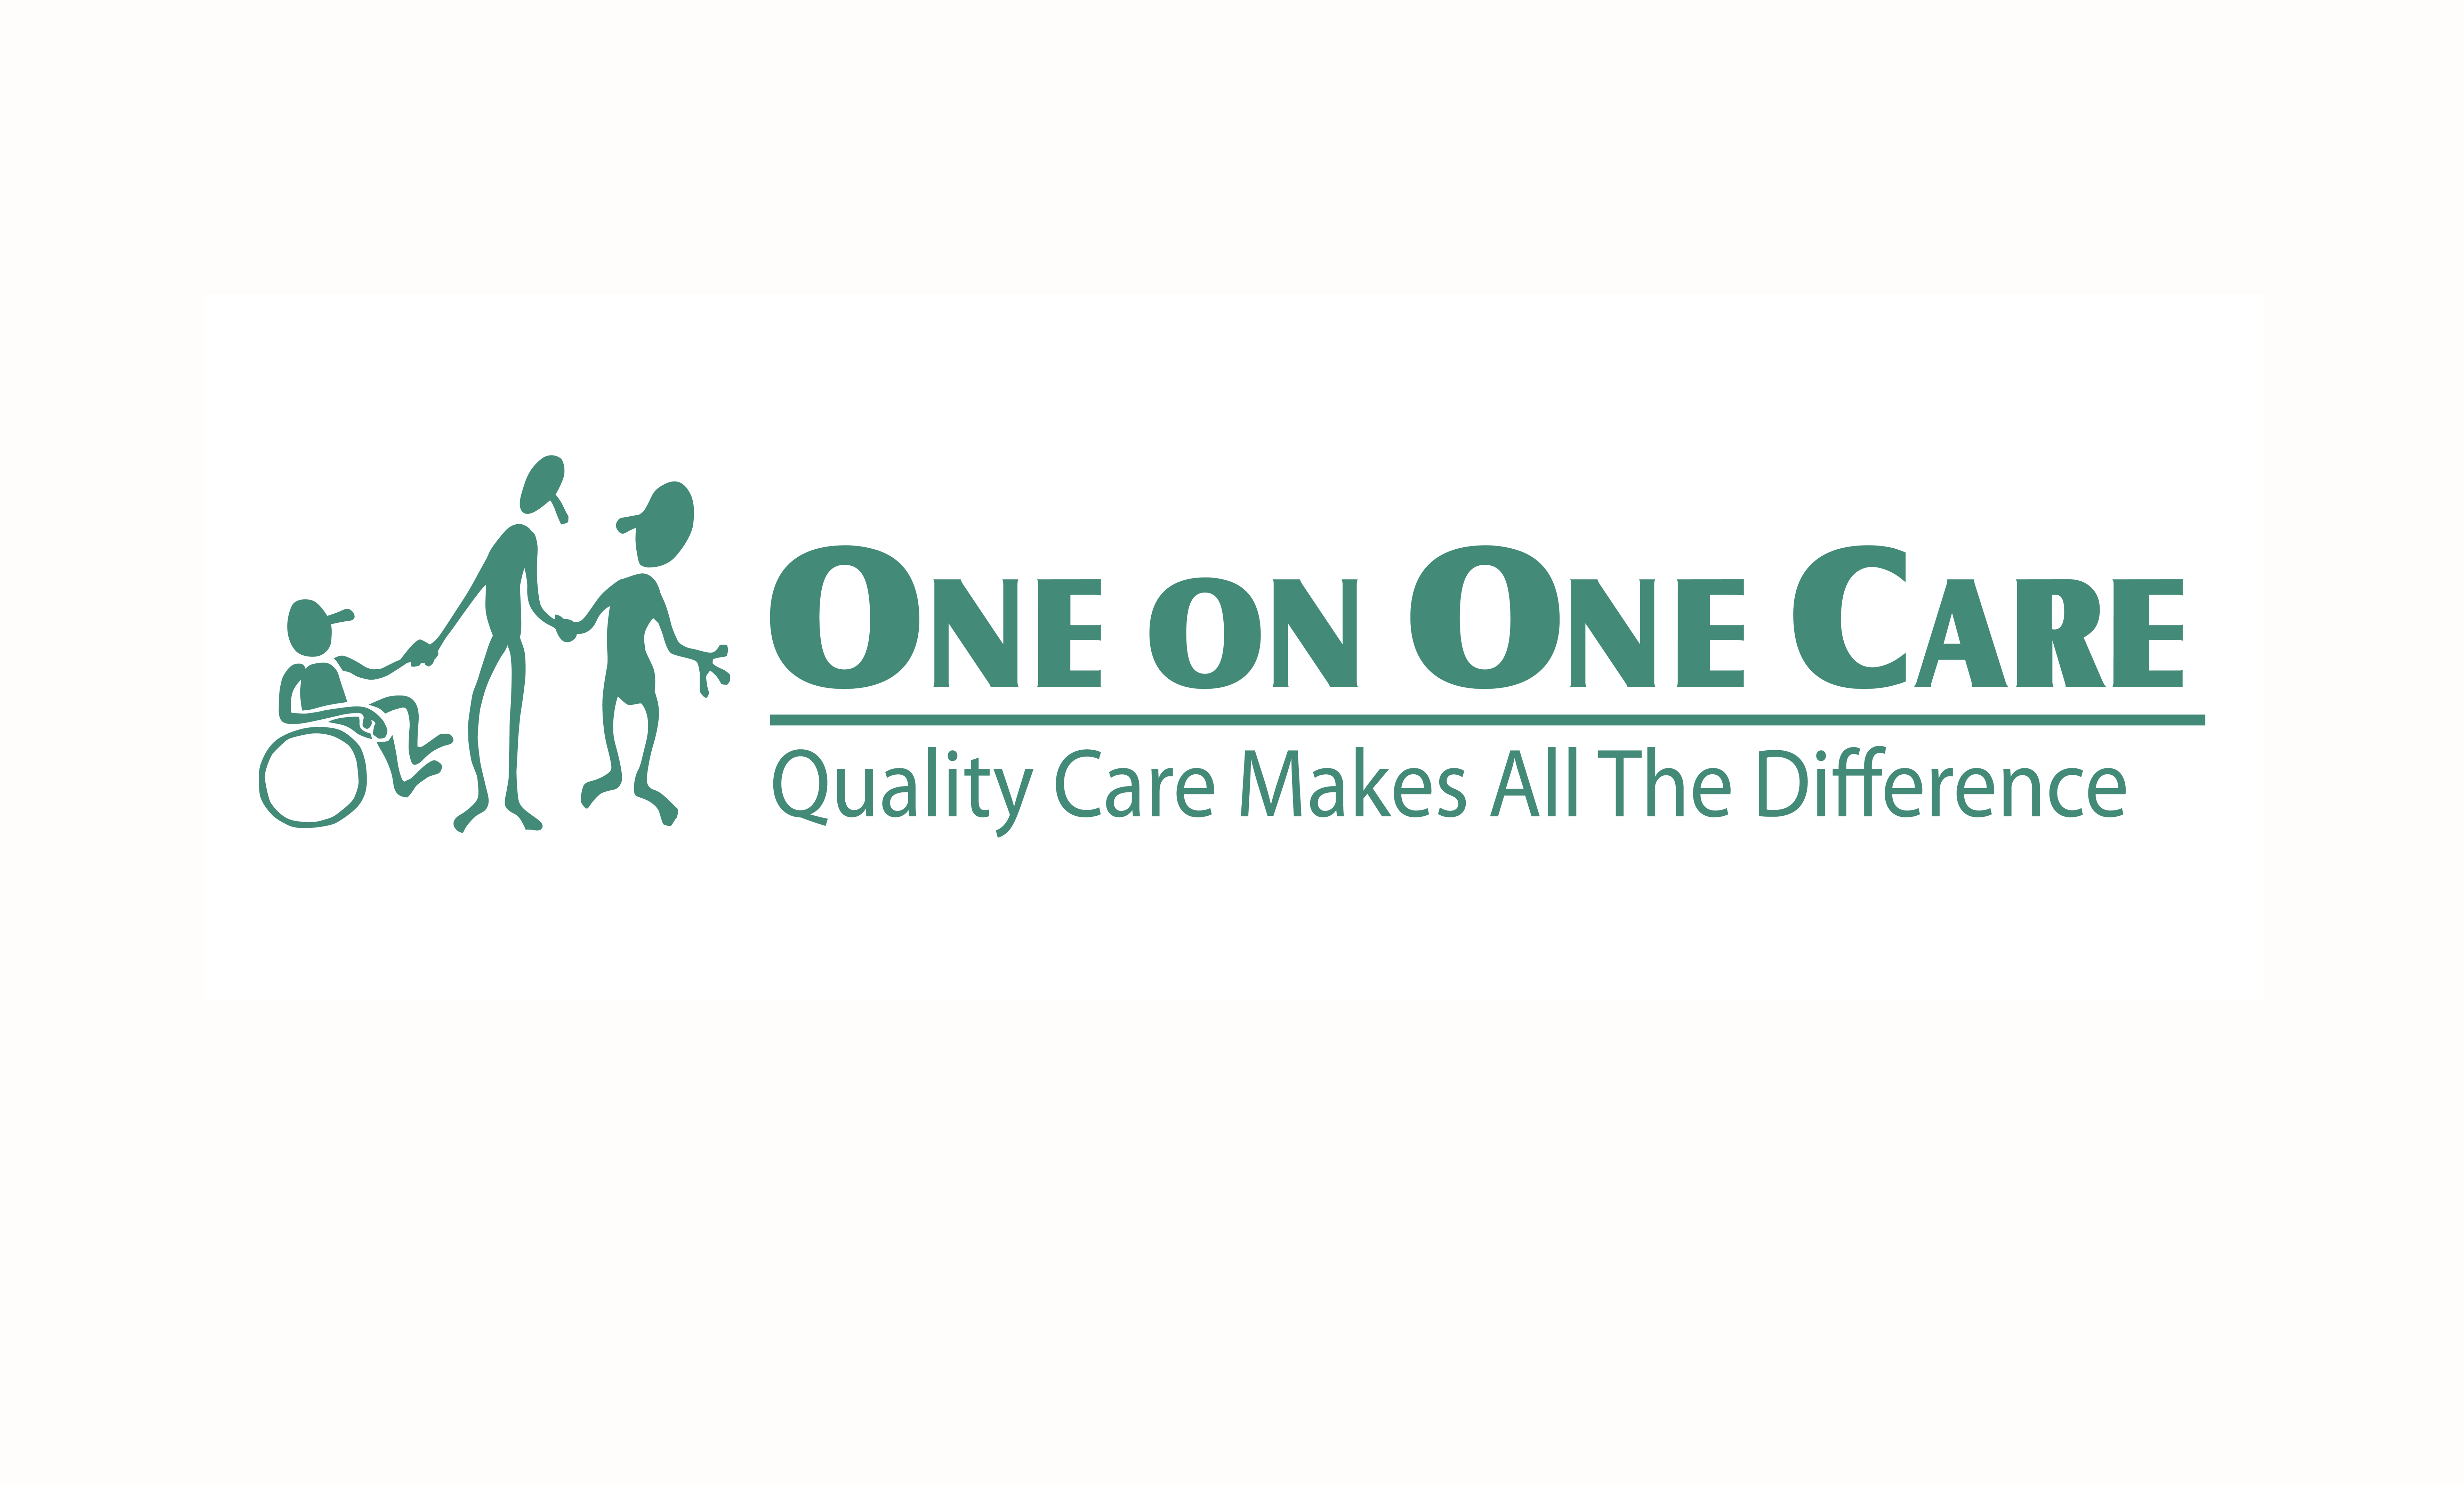 One on One Care image